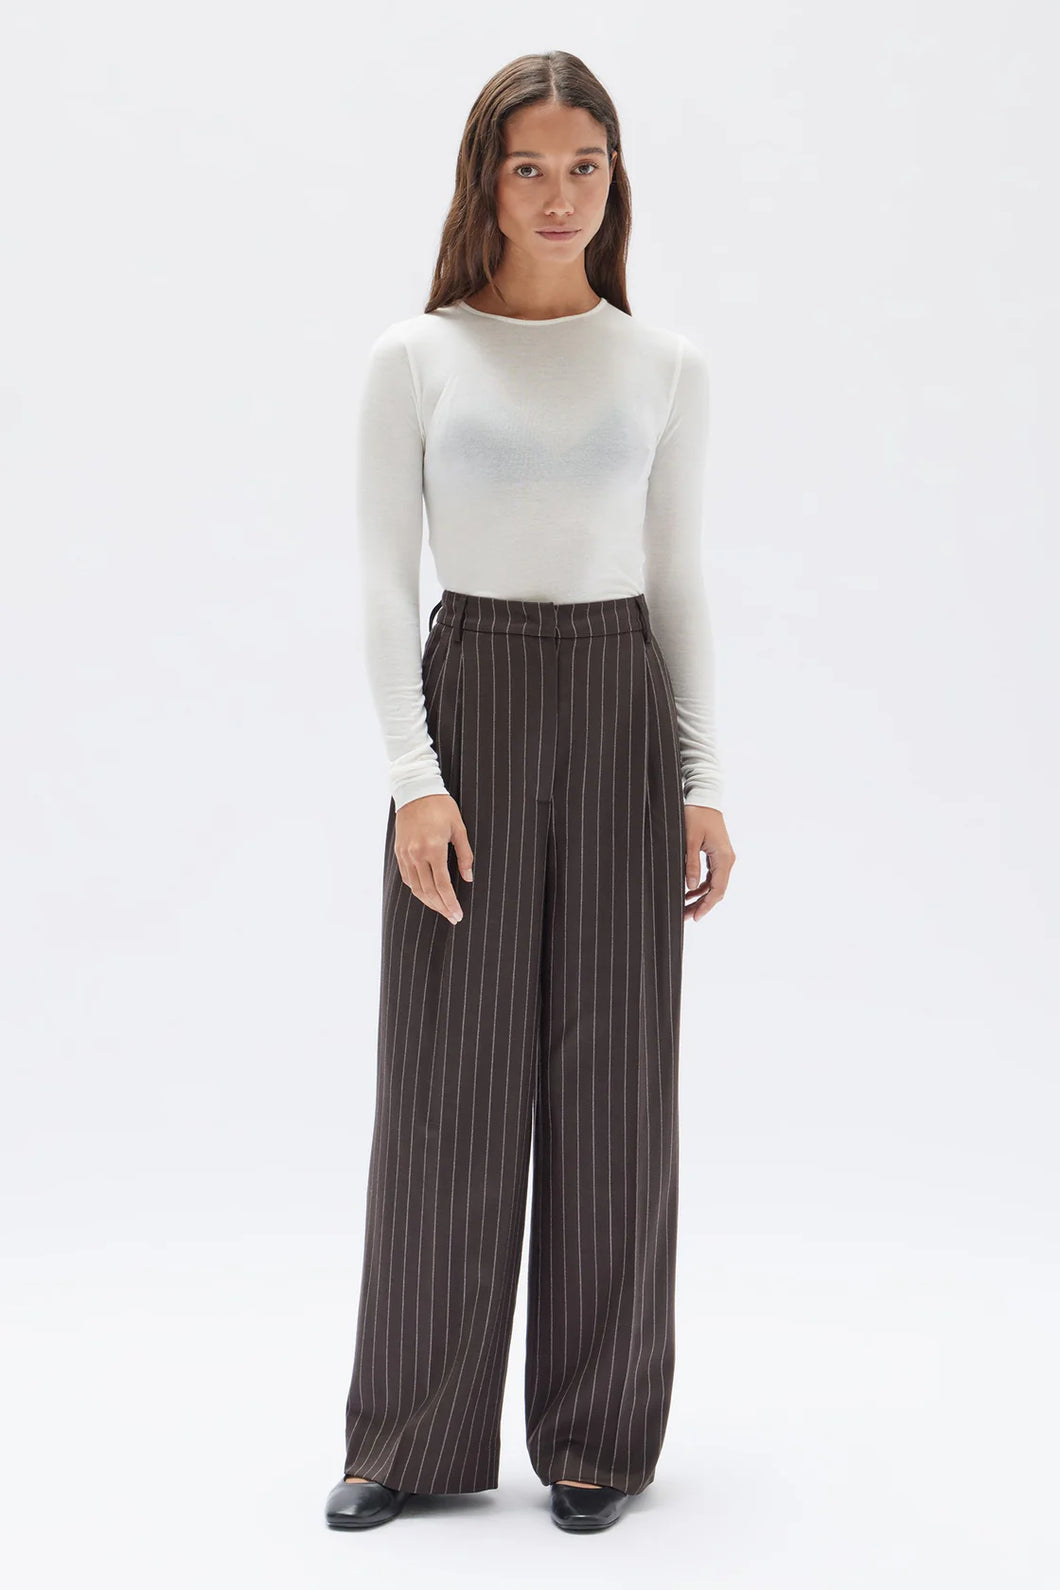 ASSEMBLY - SOFIA WOOL PINSTRIPE PANT in Chestnut stripe